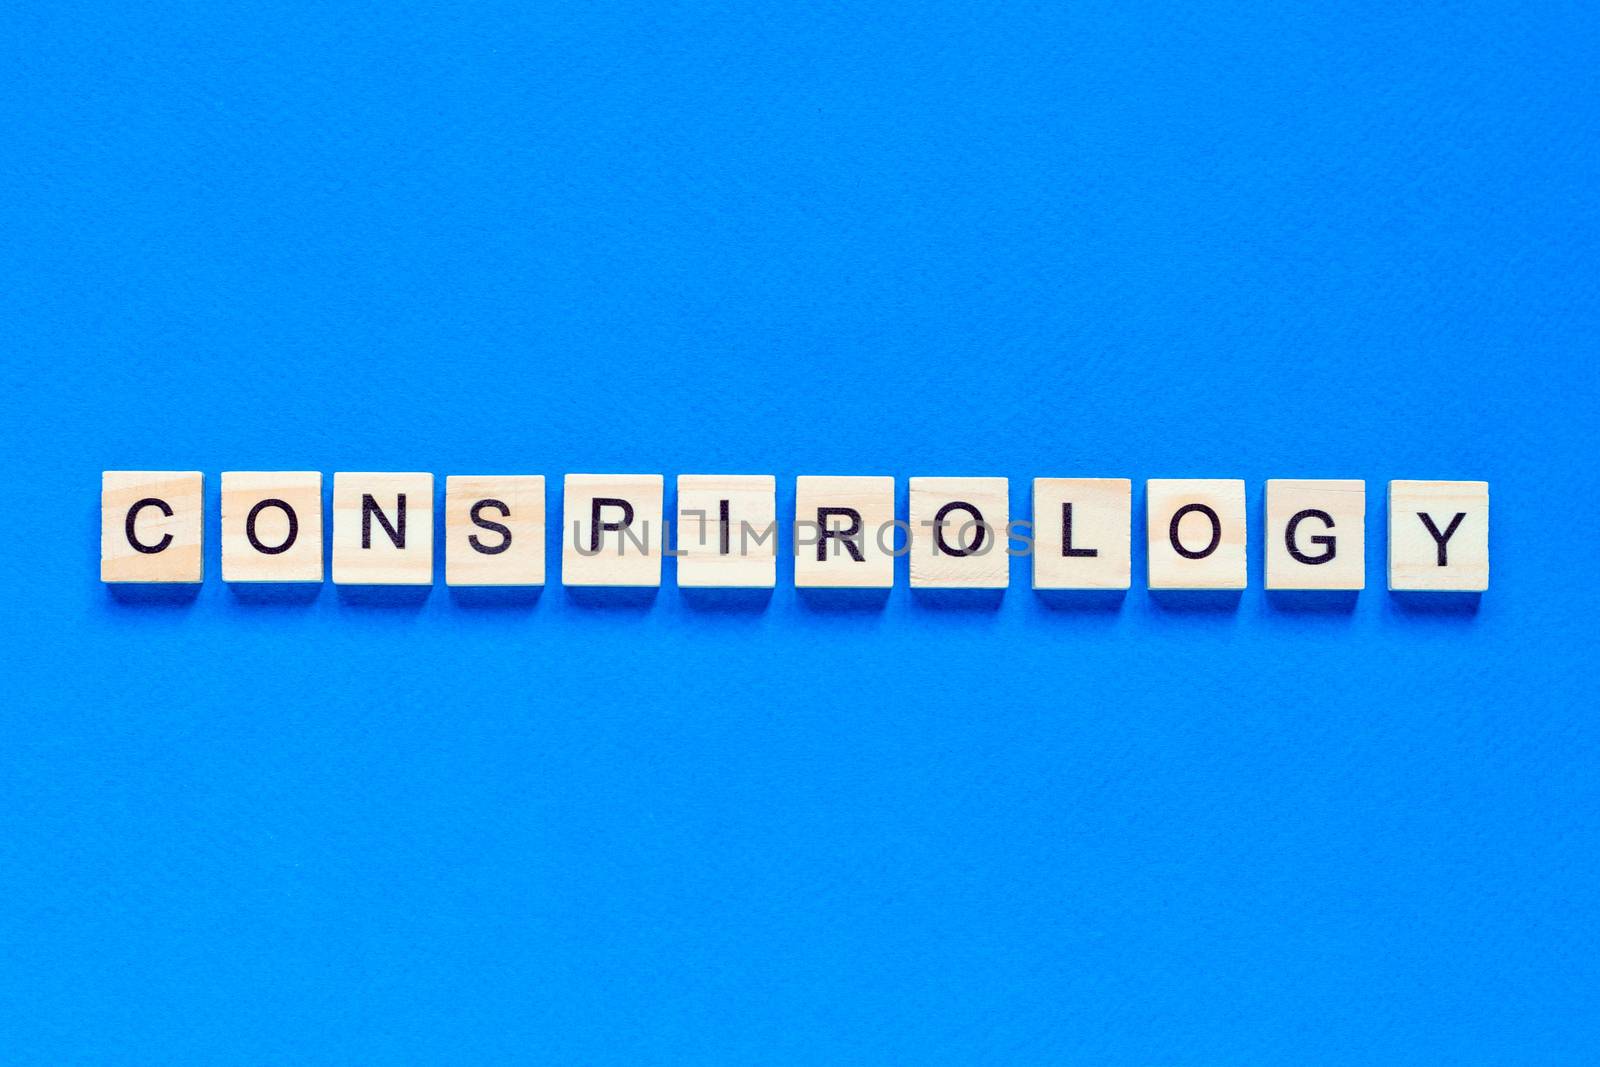 Conspirology - words made of wooden blocks with letters, secret plan of powerful people, conspiracy theory concept, top view blue background.